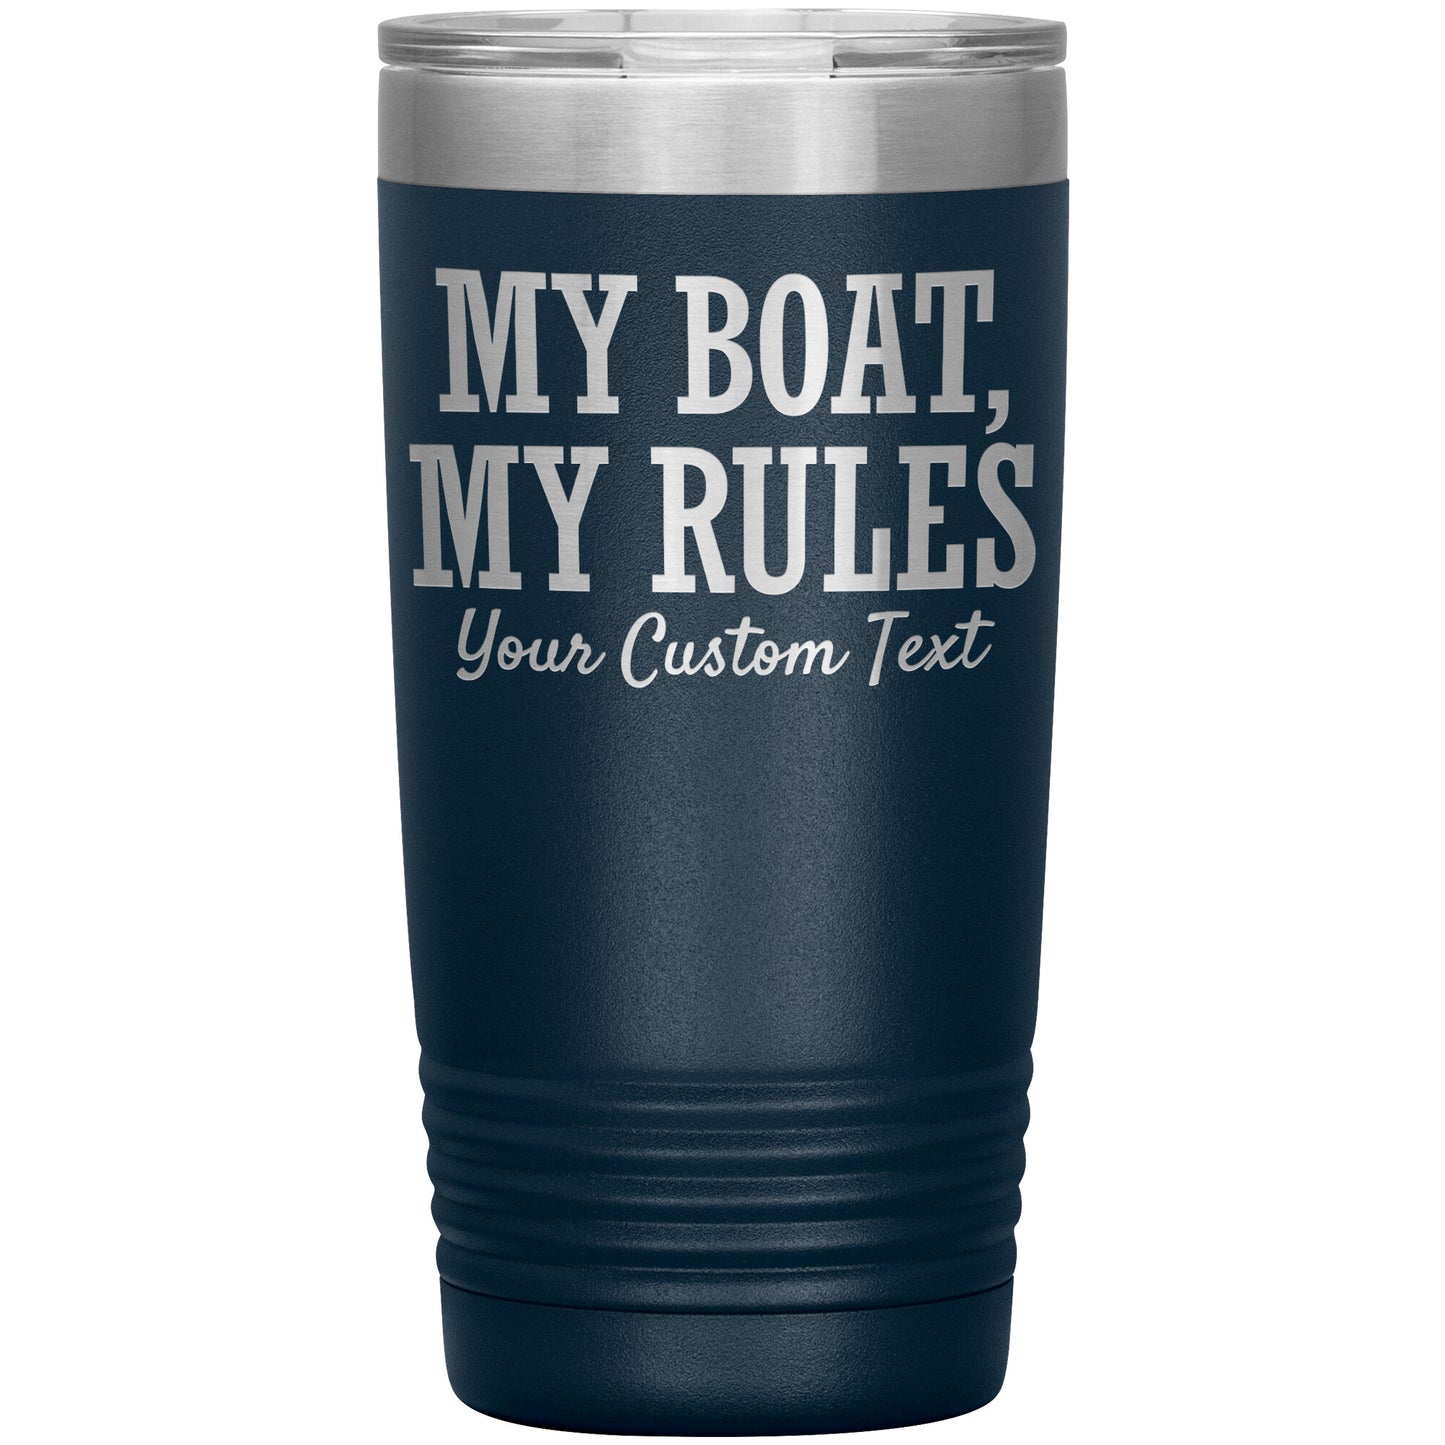 https://lakelubbers.shop/cdn/shop/products/Personalized_My_Boat_My_Rules_Drink_Tumb_20oz_Tumbler_Navy_Mockup_png_6e6a6423-2017-4d84-a0e9-d96289bd49fd.jpg?v=1669238723&width=1445